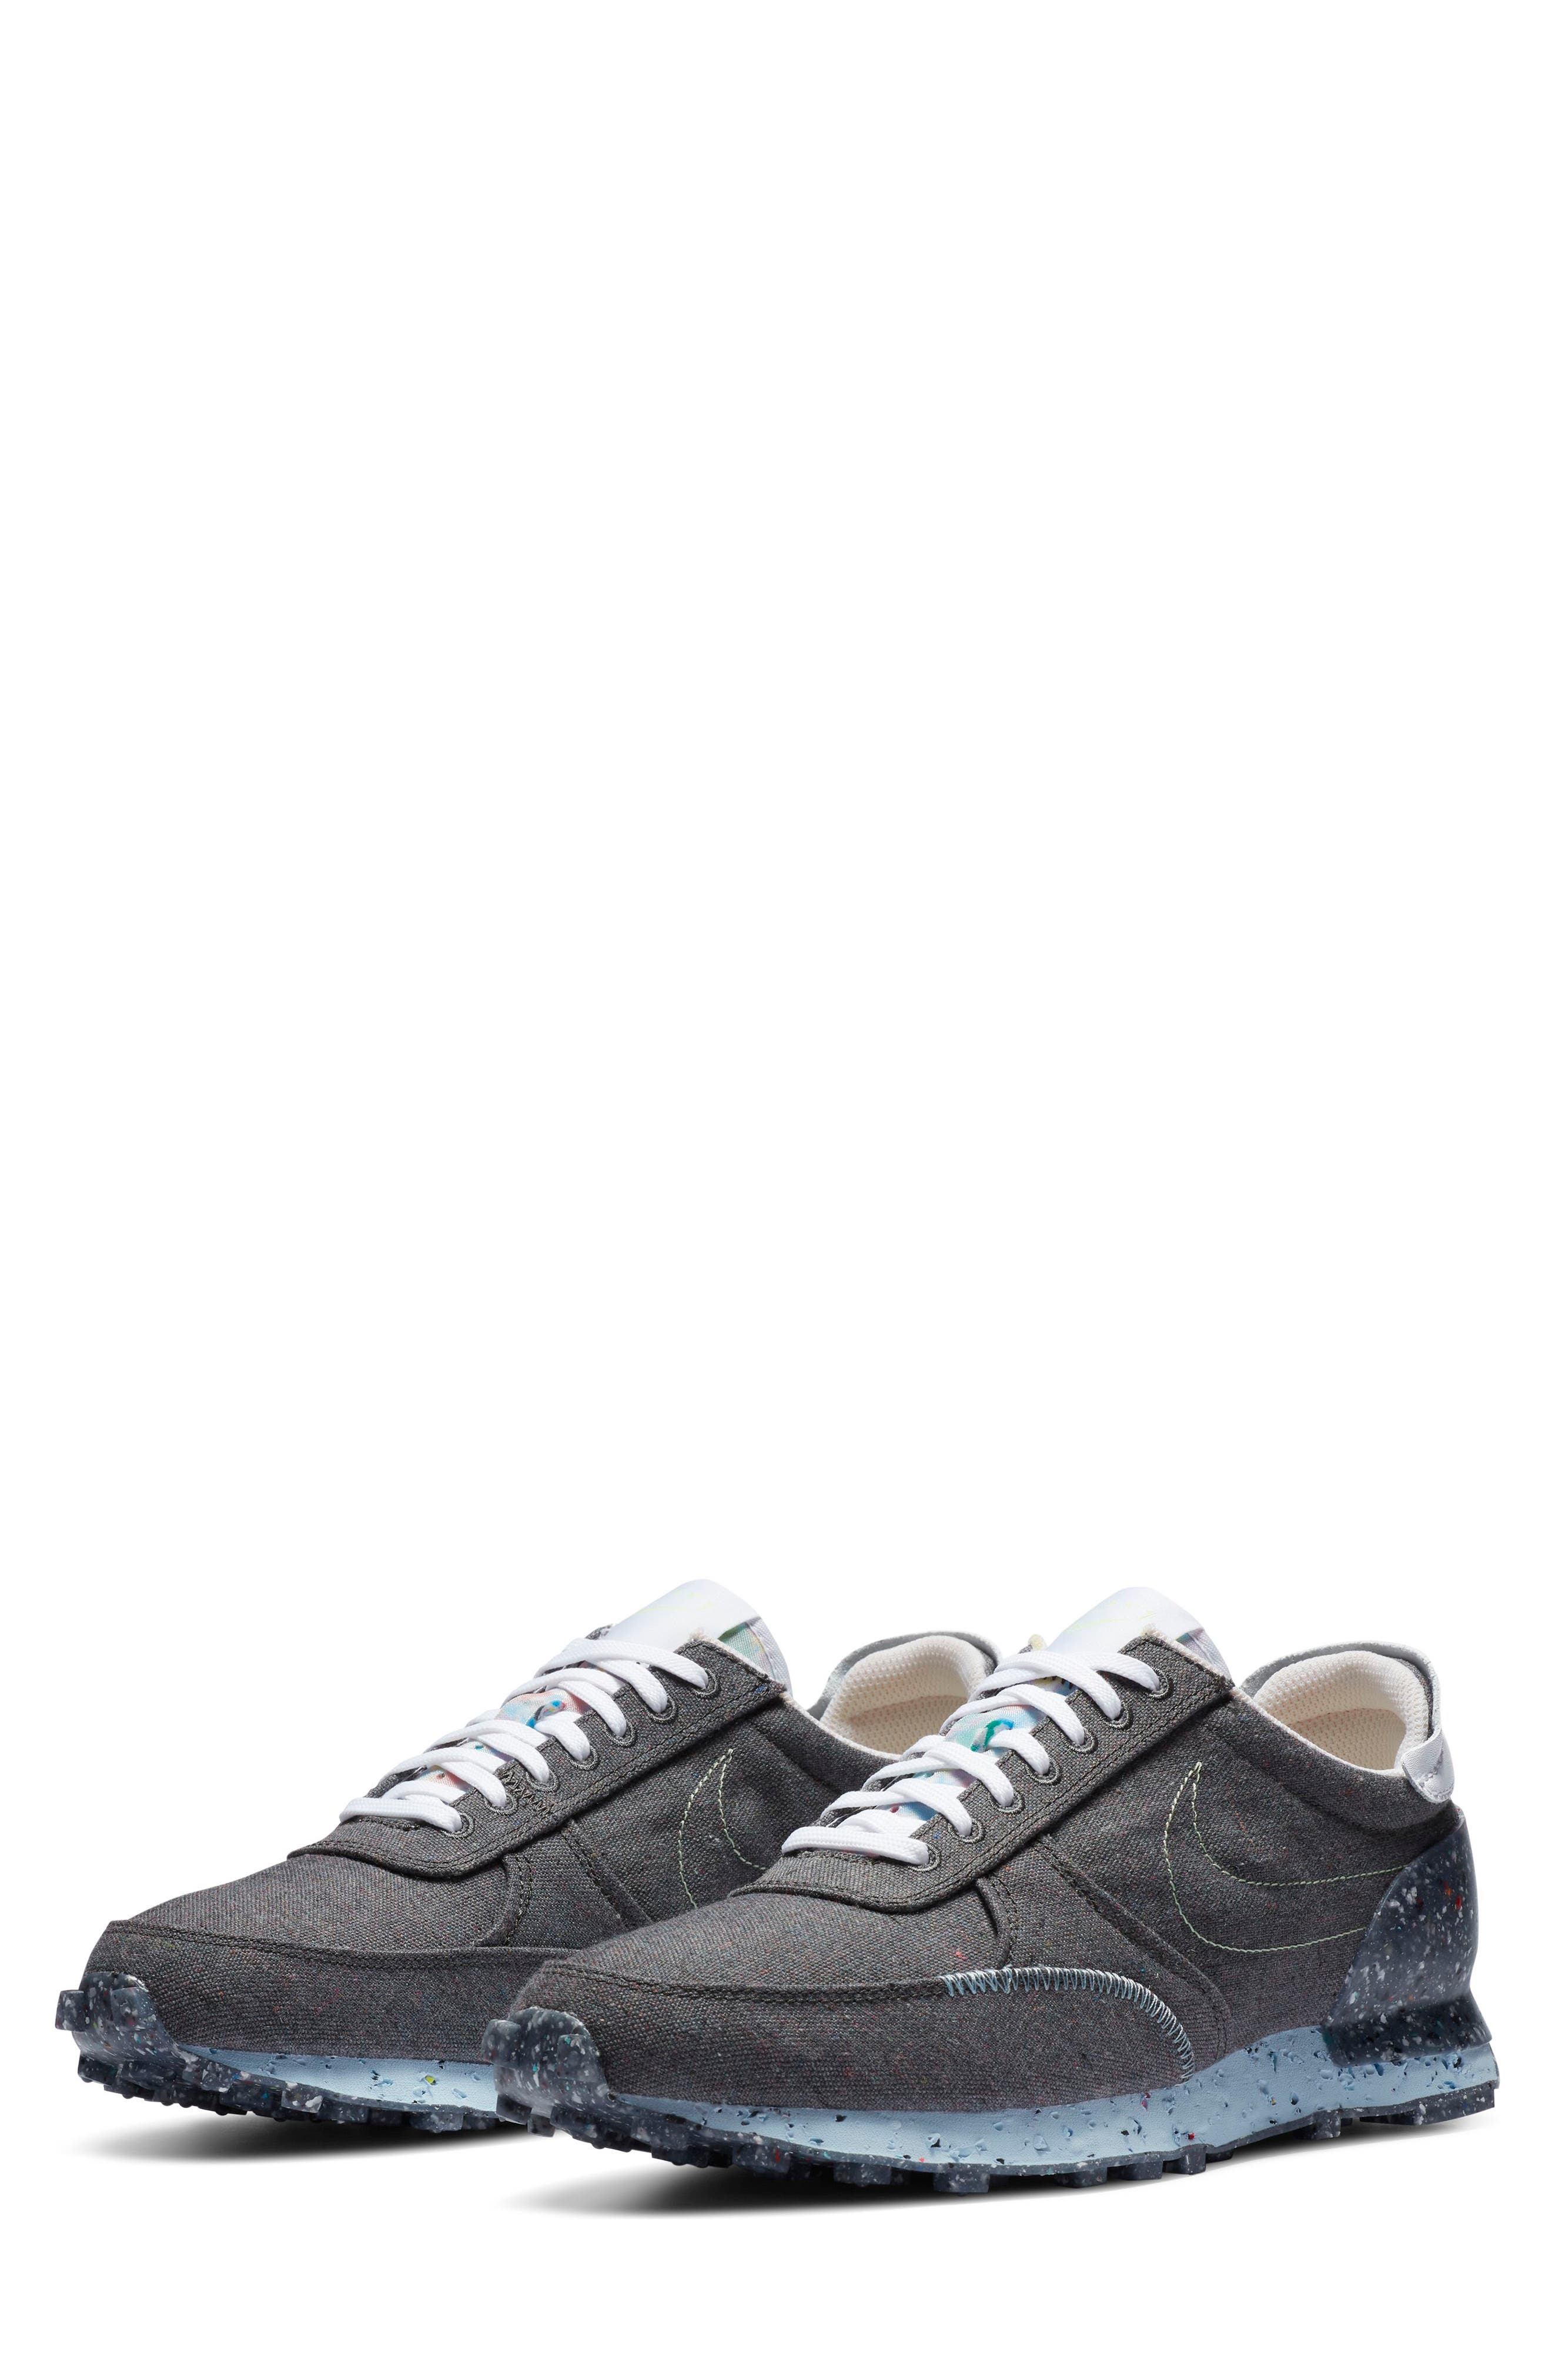 nordstrom men's casual shoes